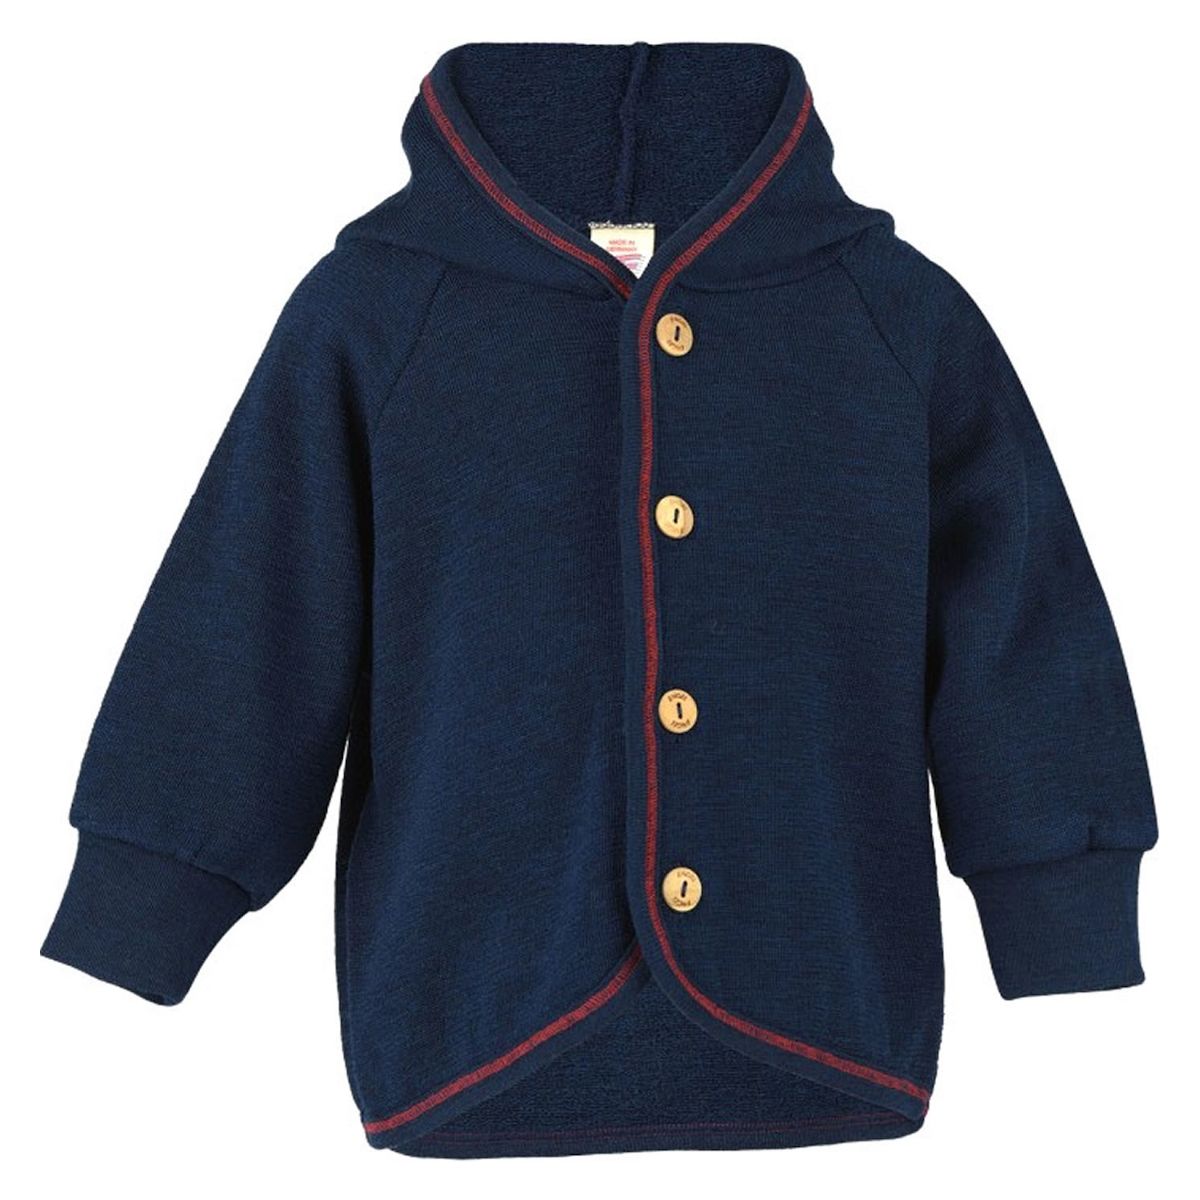 ENGEL Natur Hooded baby jacket with wooden buttons Navy blue